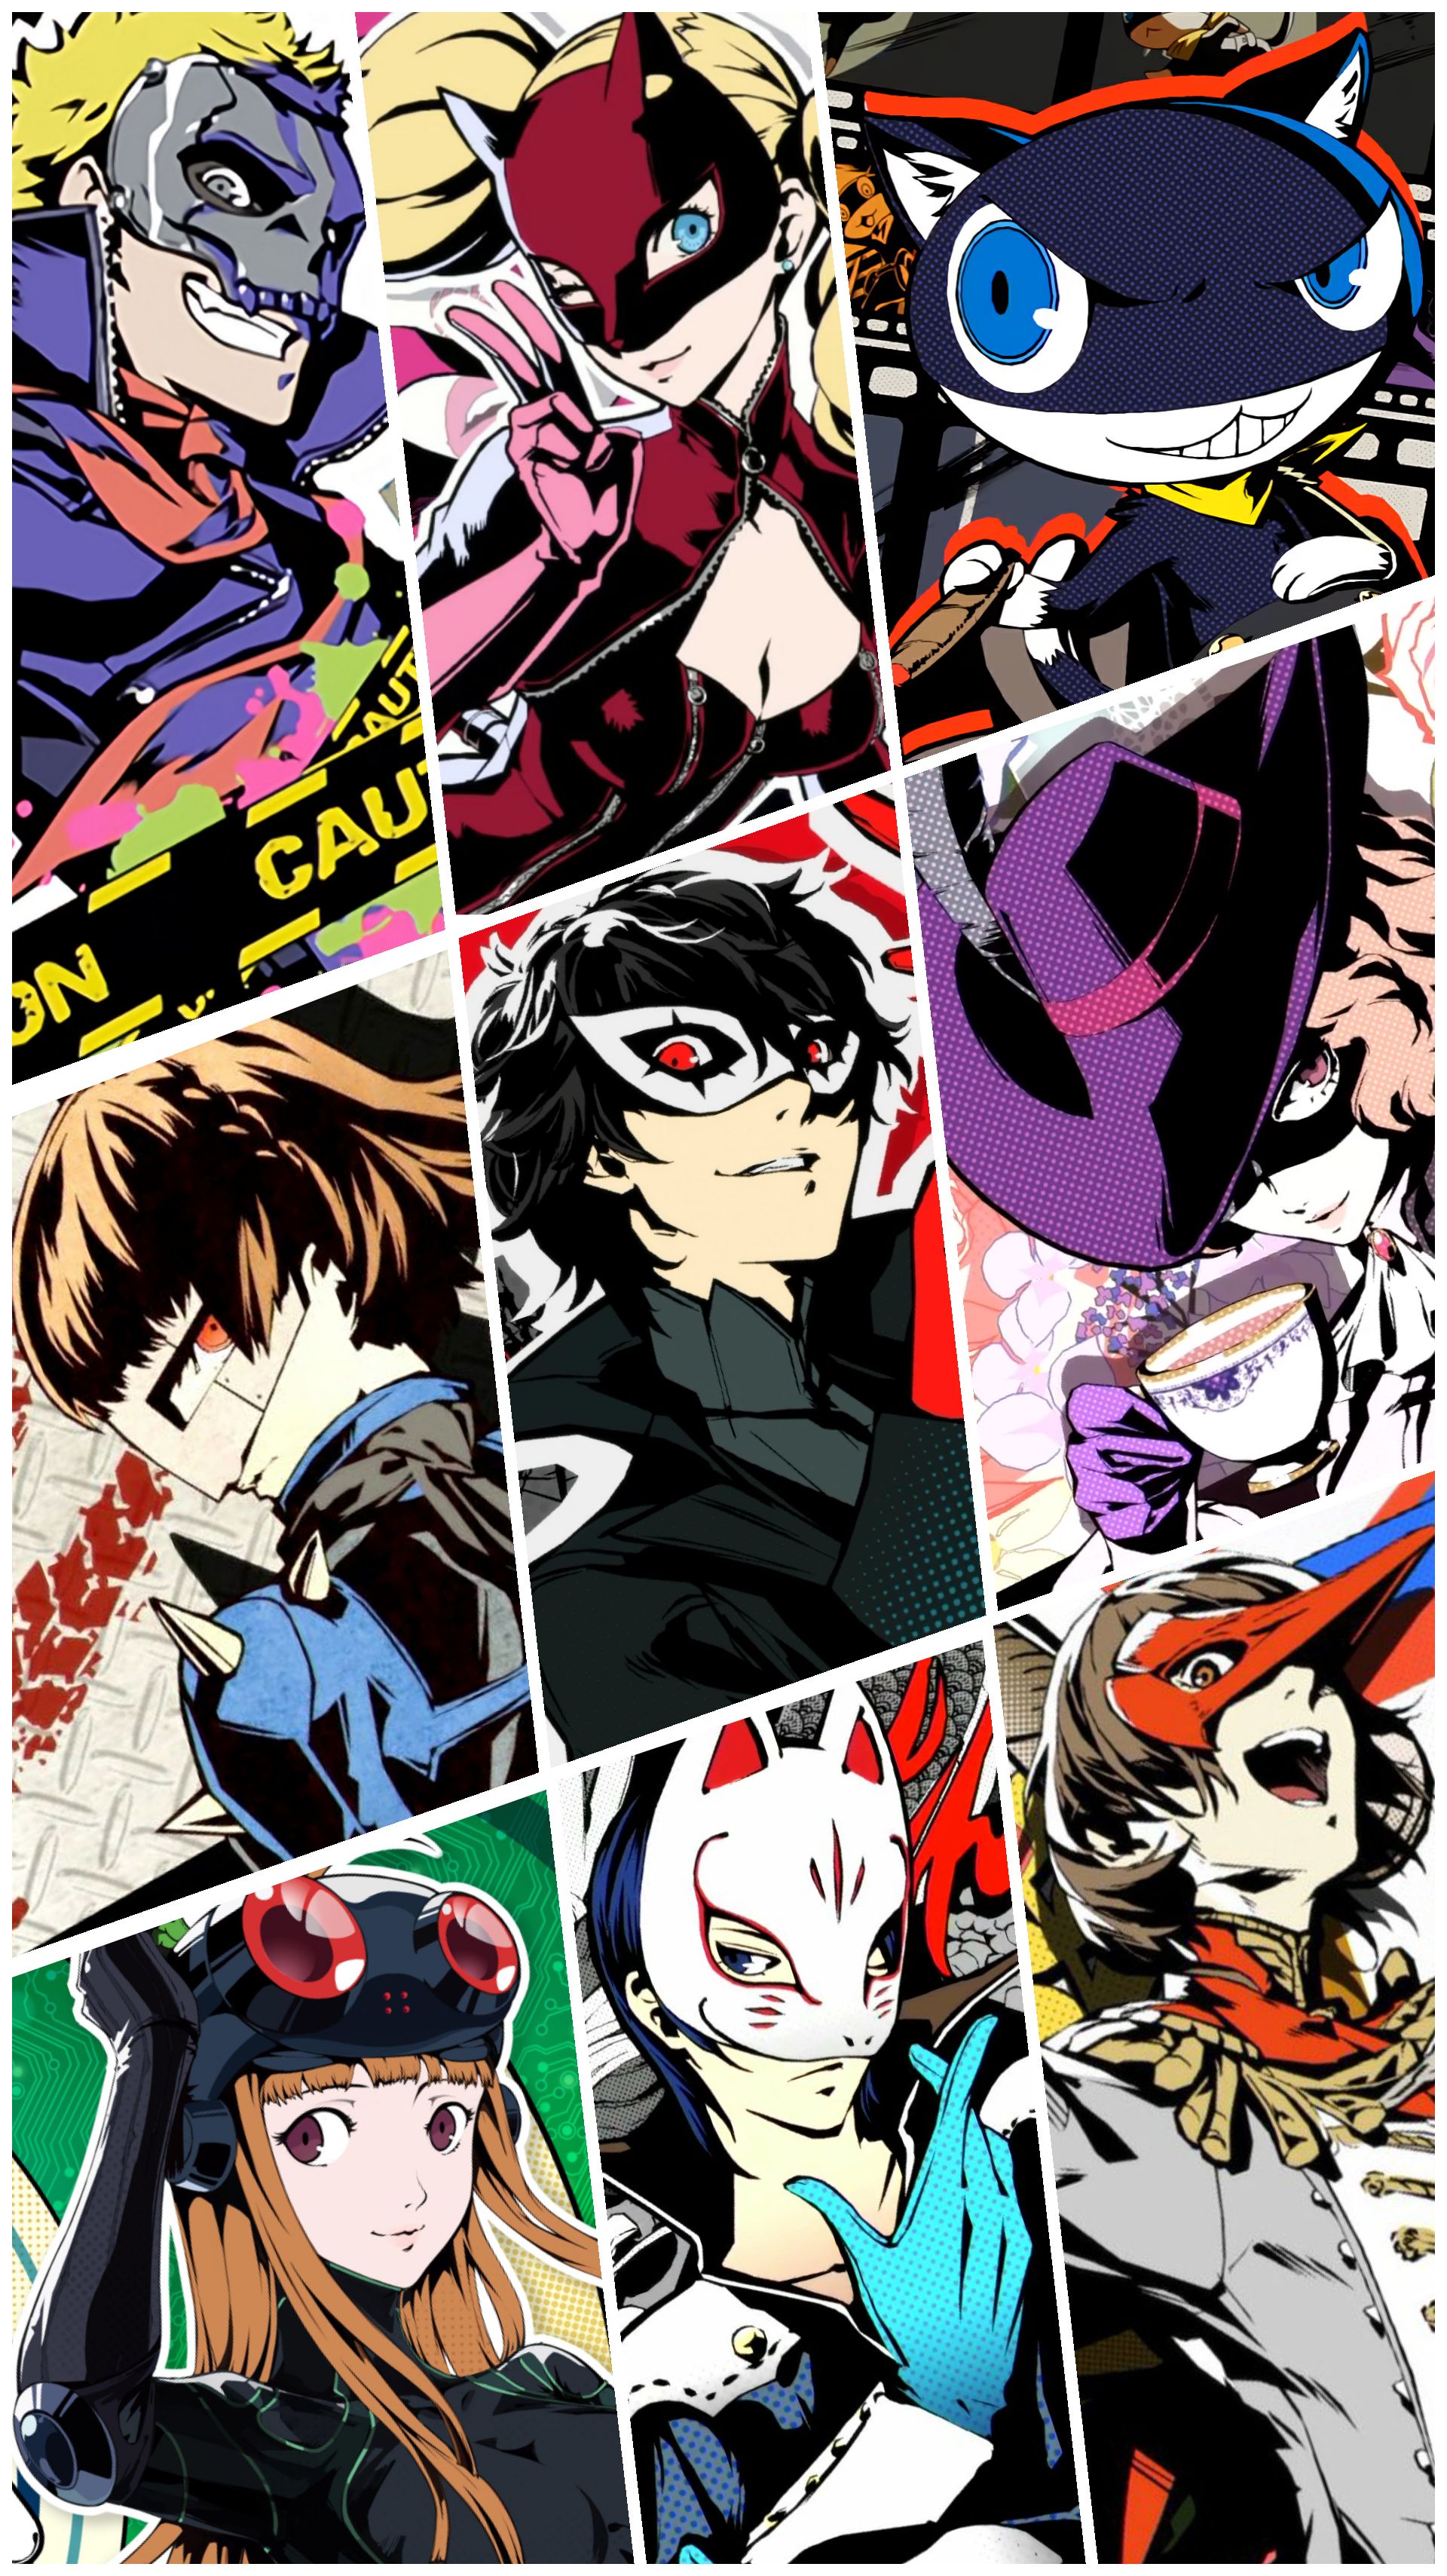 Made a phone wallpaper of all the phantom thieves: Persona5